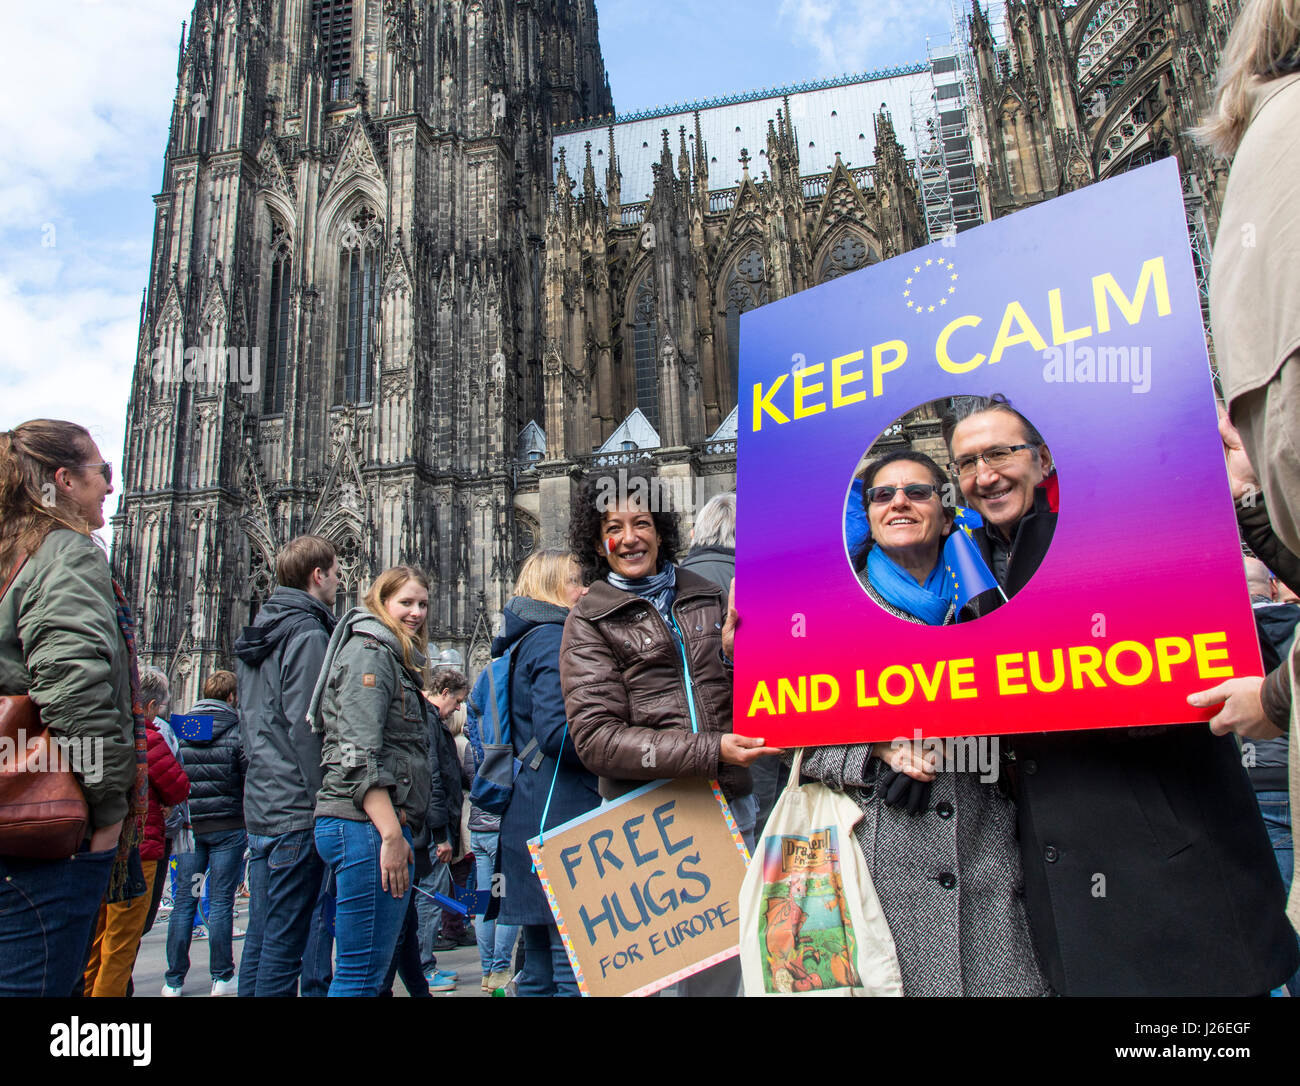 Puls of Europe movement, a pro-European citizen's initiative, people meet every Sunday afternoon in several European cities, Cologne, Germany, Stock Photo